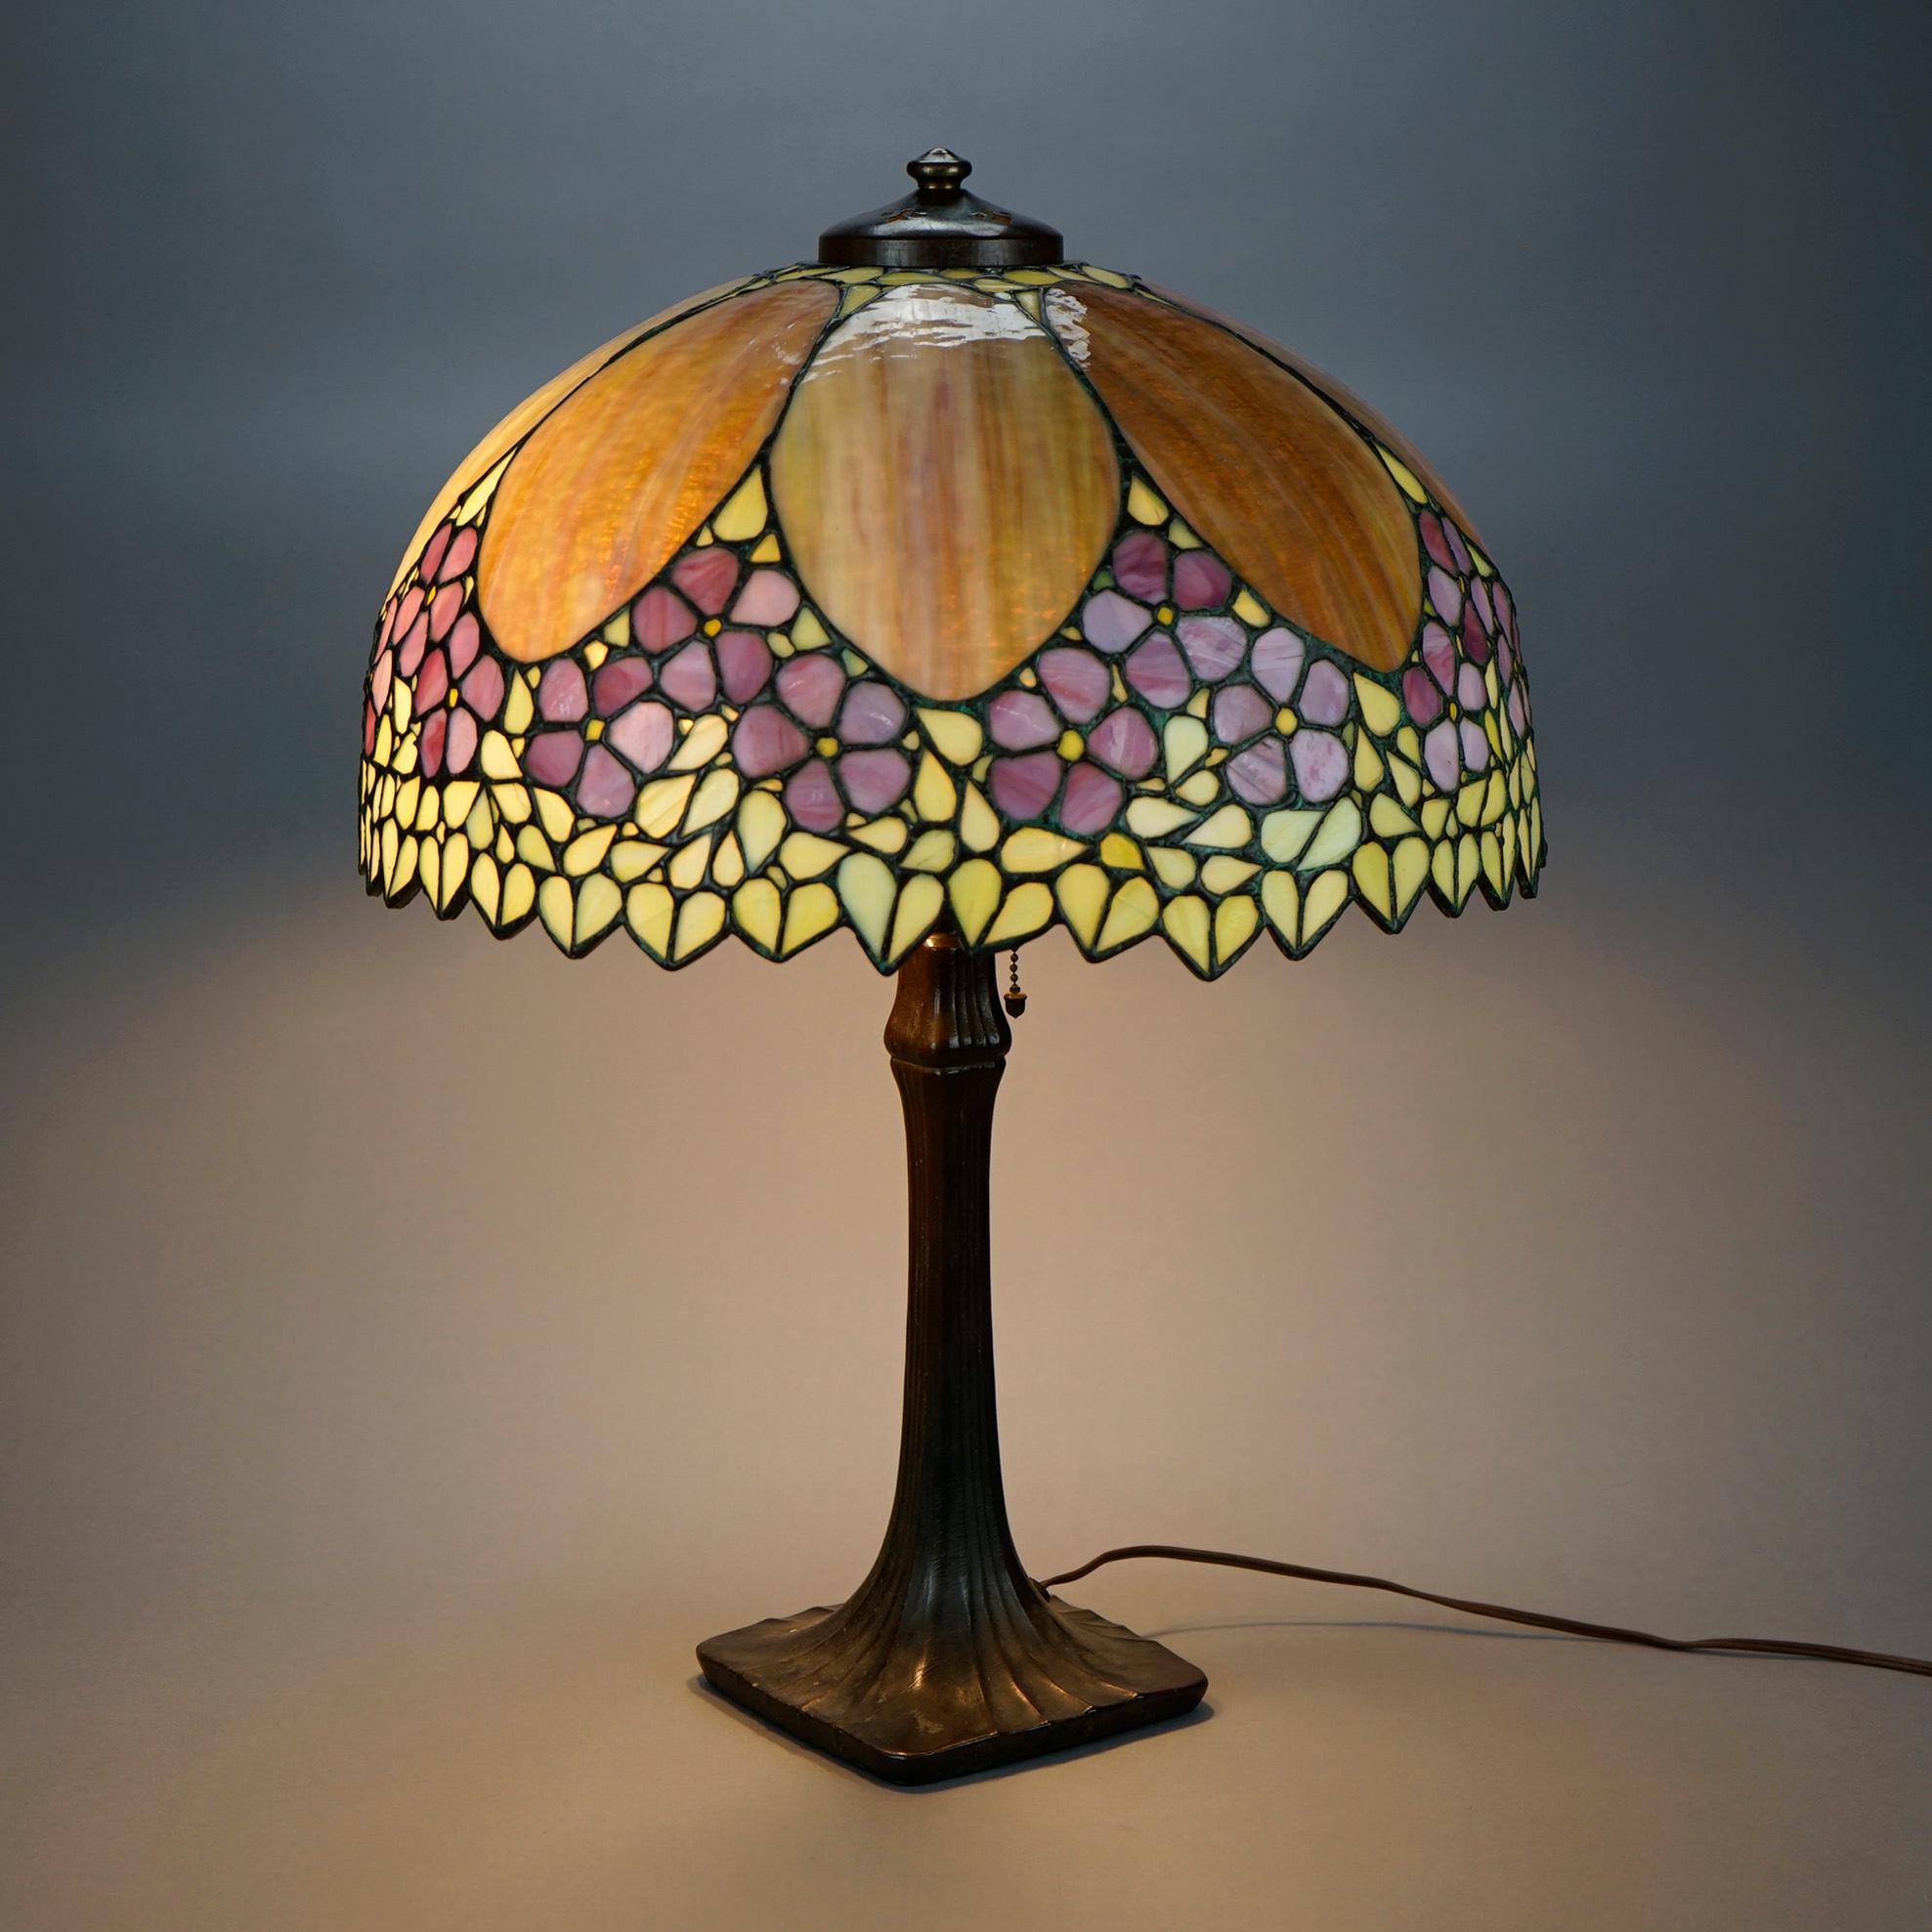 Arts and Crafts Antique Arts & Crafts Leaded Glass Unique Shade & Handel Table Lamp circa 1910